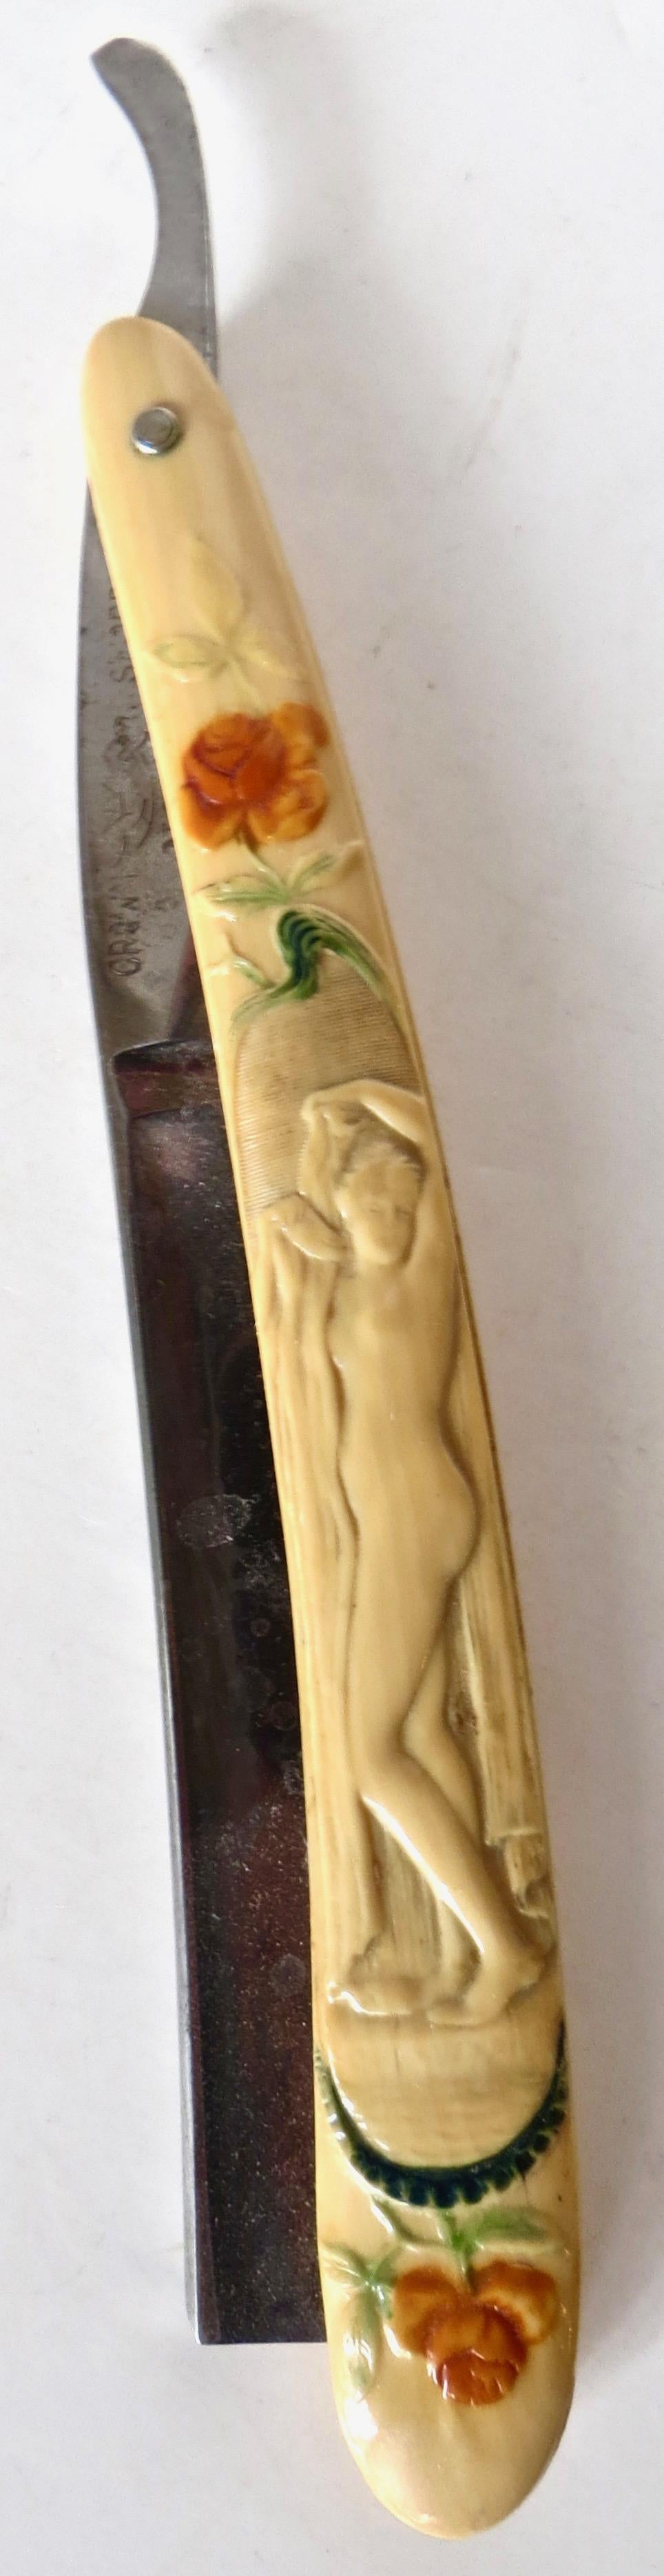 Art Nouveau Nude Theme and Roses Straight Razor, Germany, 1905